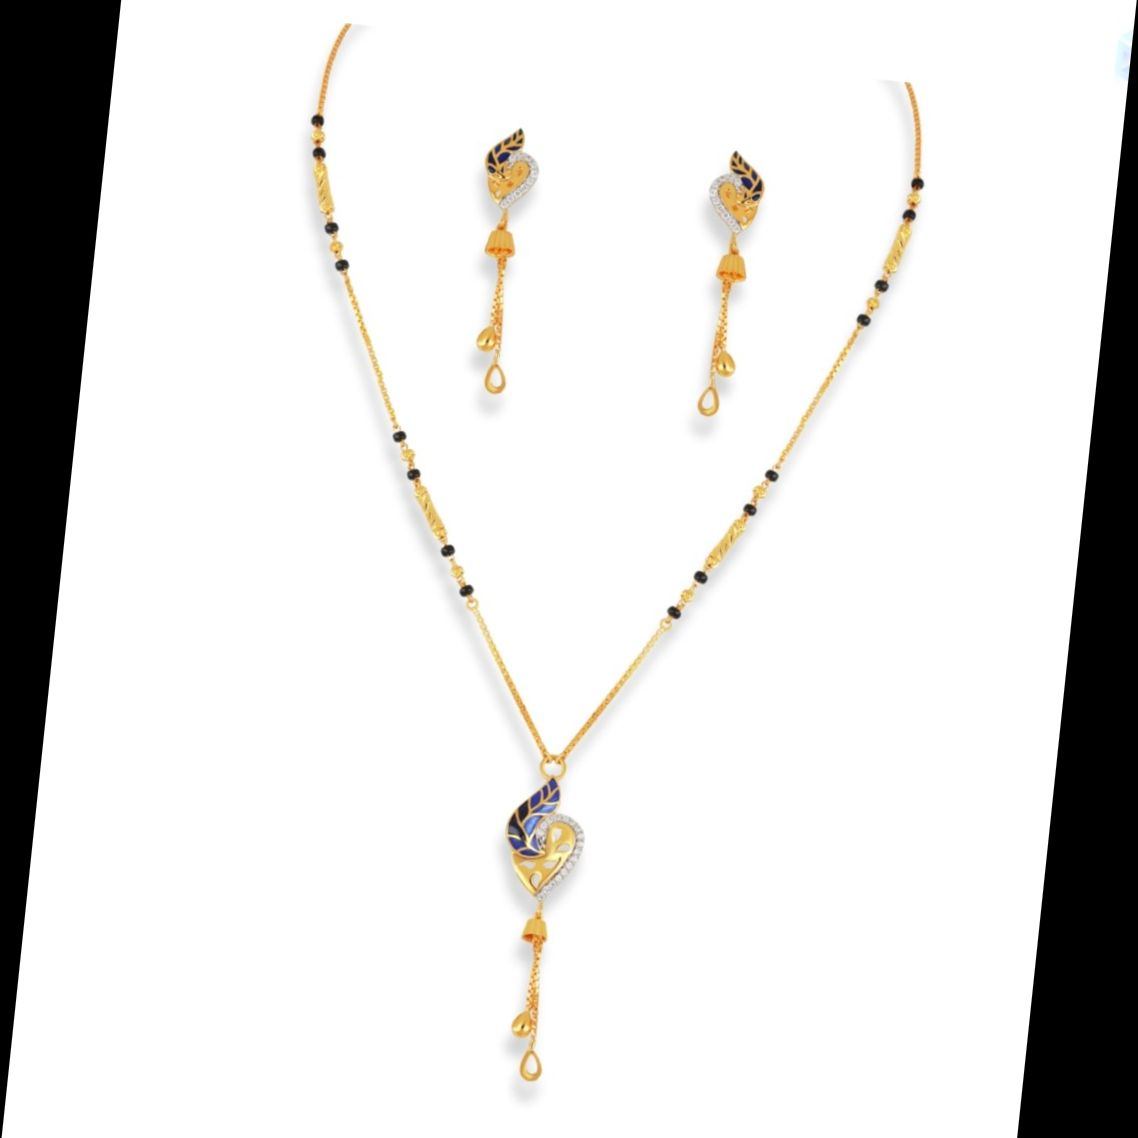 Designer Mangalsutra with Earrings by Niscka - Mangalsutra for Wedding